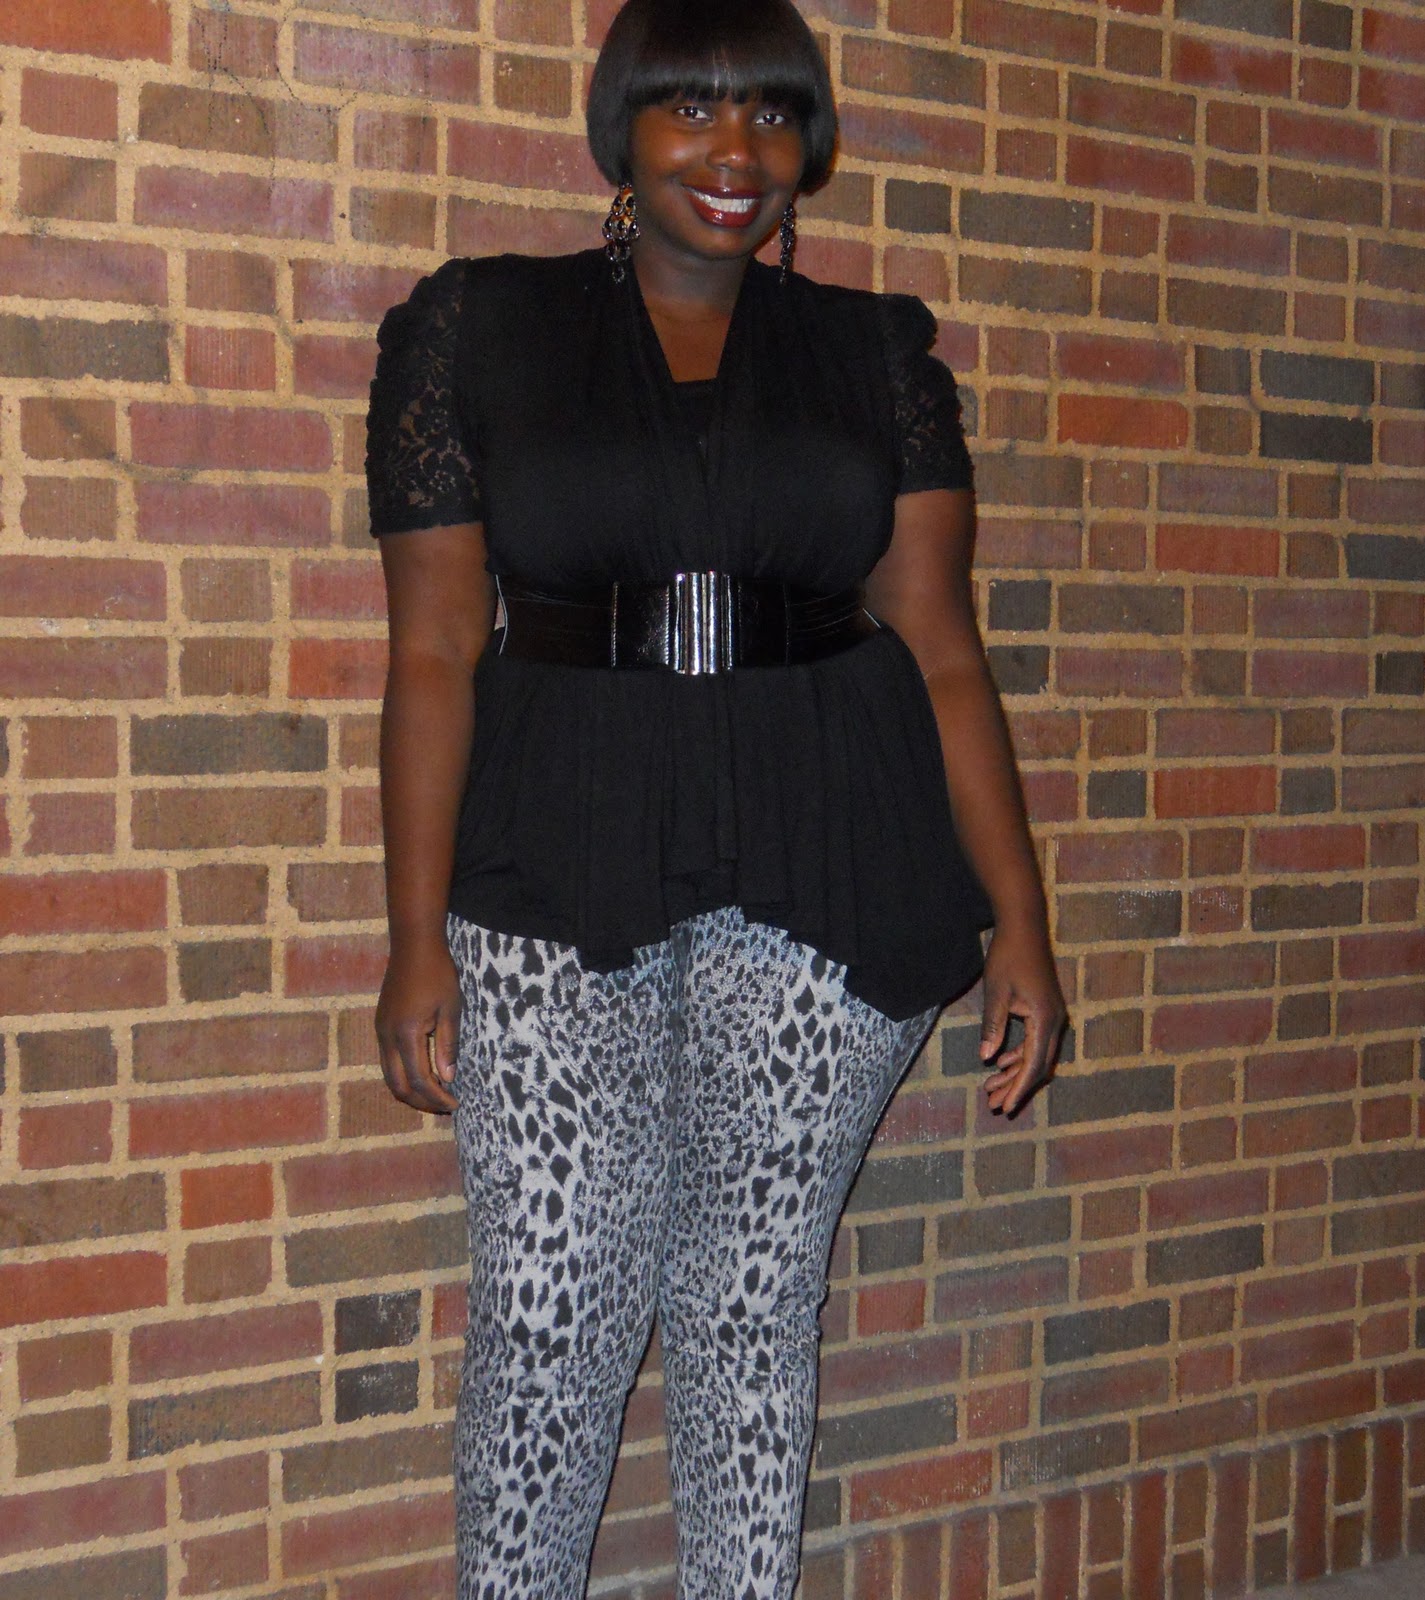 AN OLD FAVORITE: WHO SAYS A CURVY GIRL CAN'T WEAR LEOPARD PRINT PANTS? -  Stylish Curves